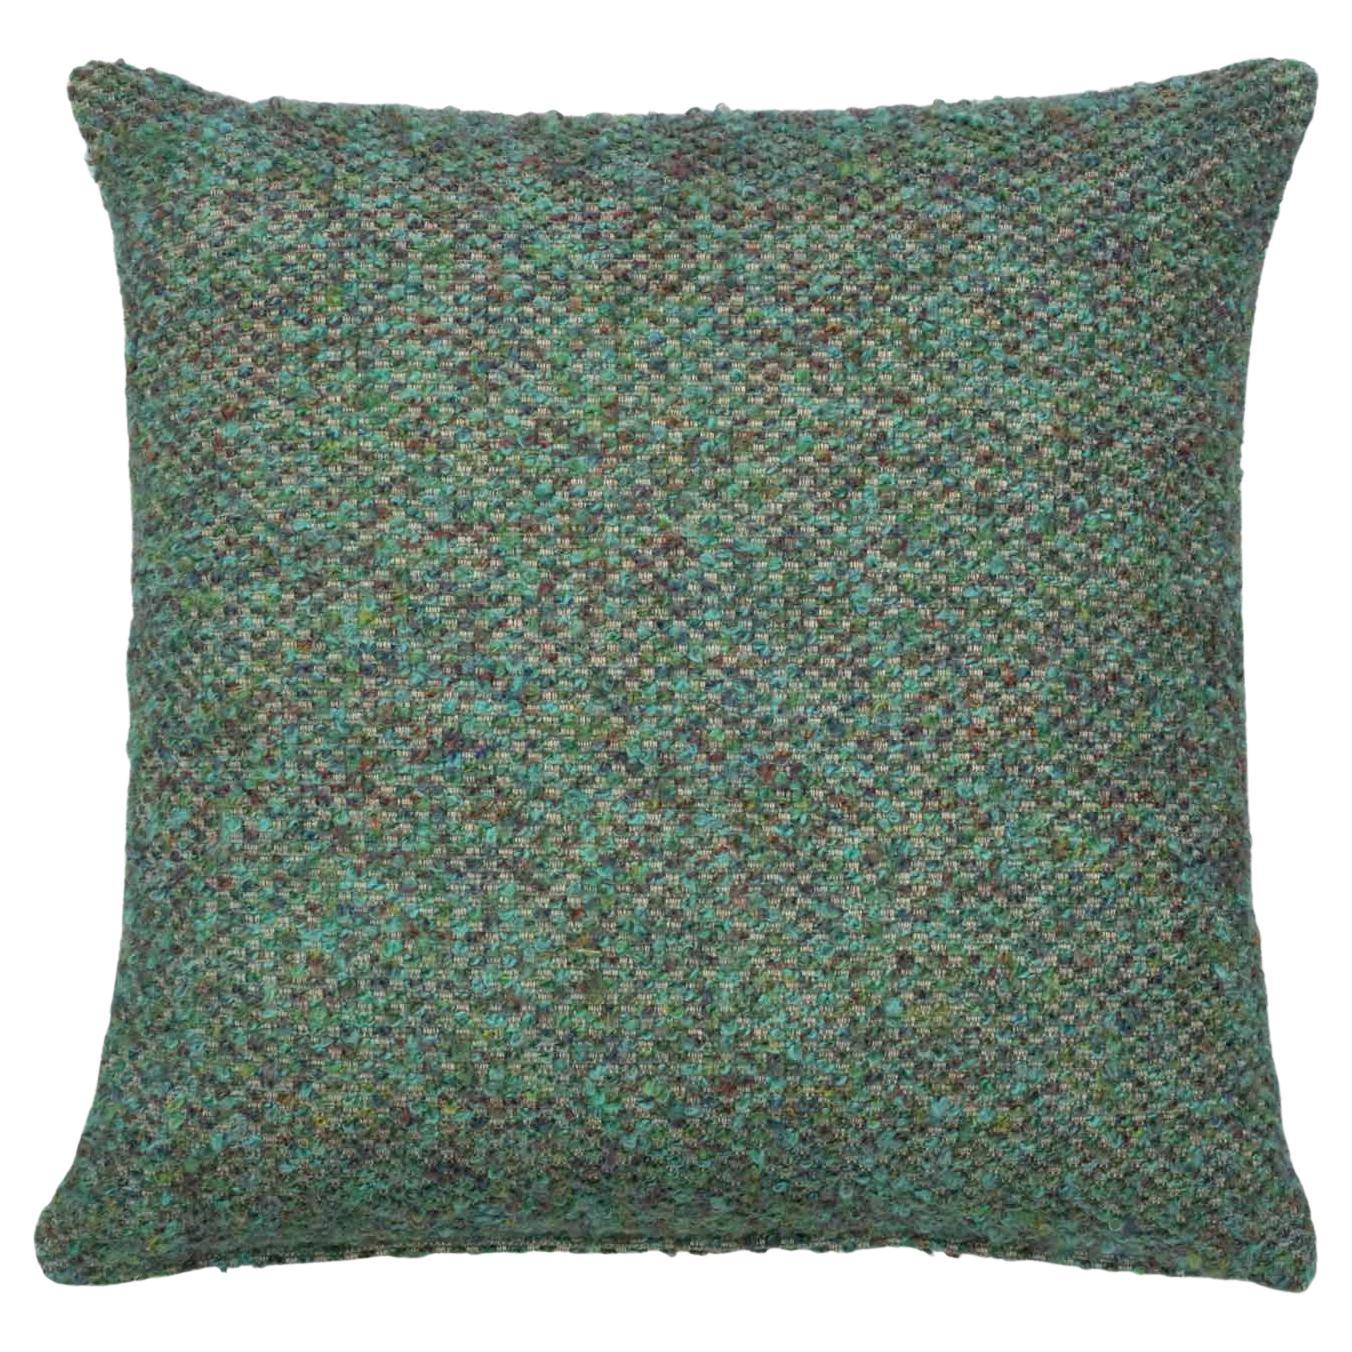 Modern Textured Throw Pillow Turquoise Blue "Brazil" by Evolution21